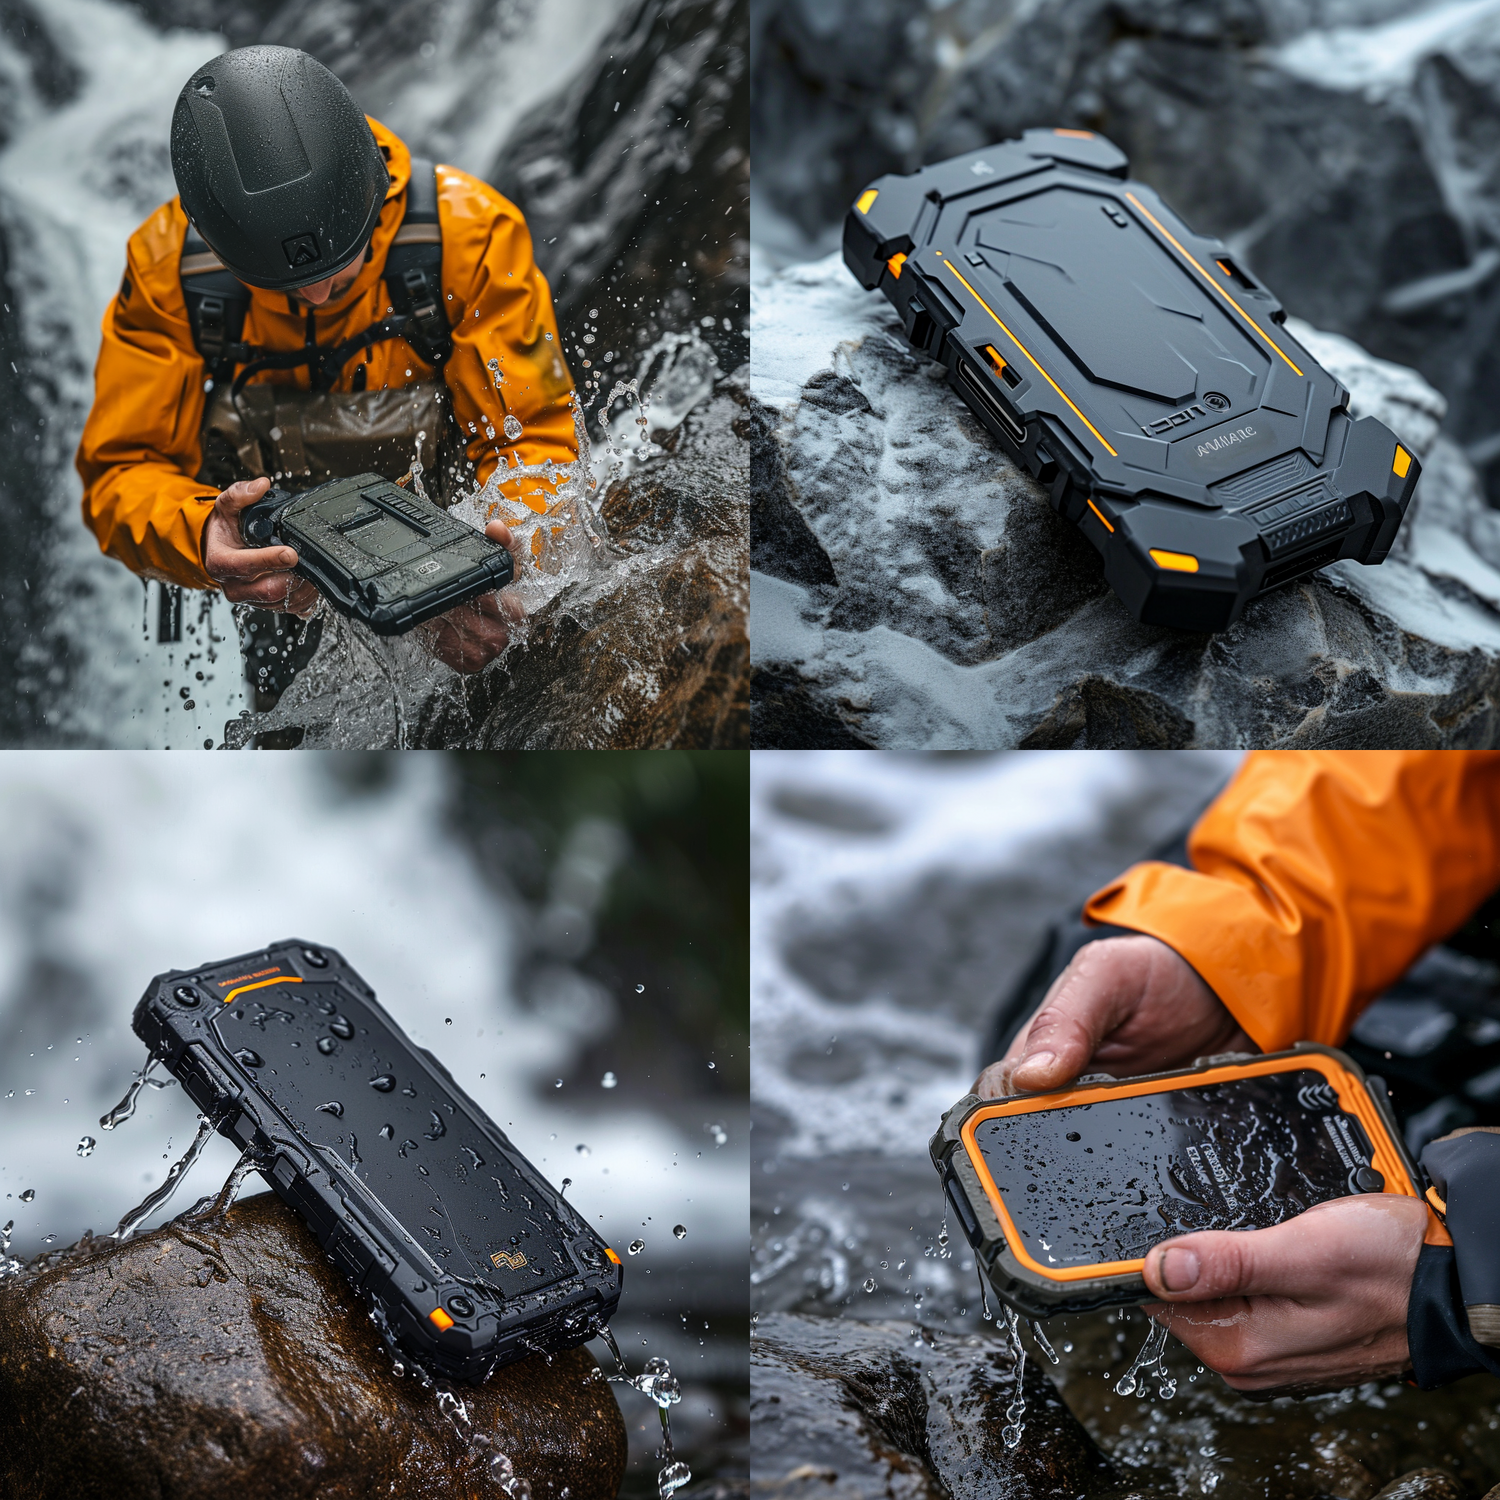 AGM Mobile's Rugged Smartphones: Redefining Durability and Innovation in Mobile Technology